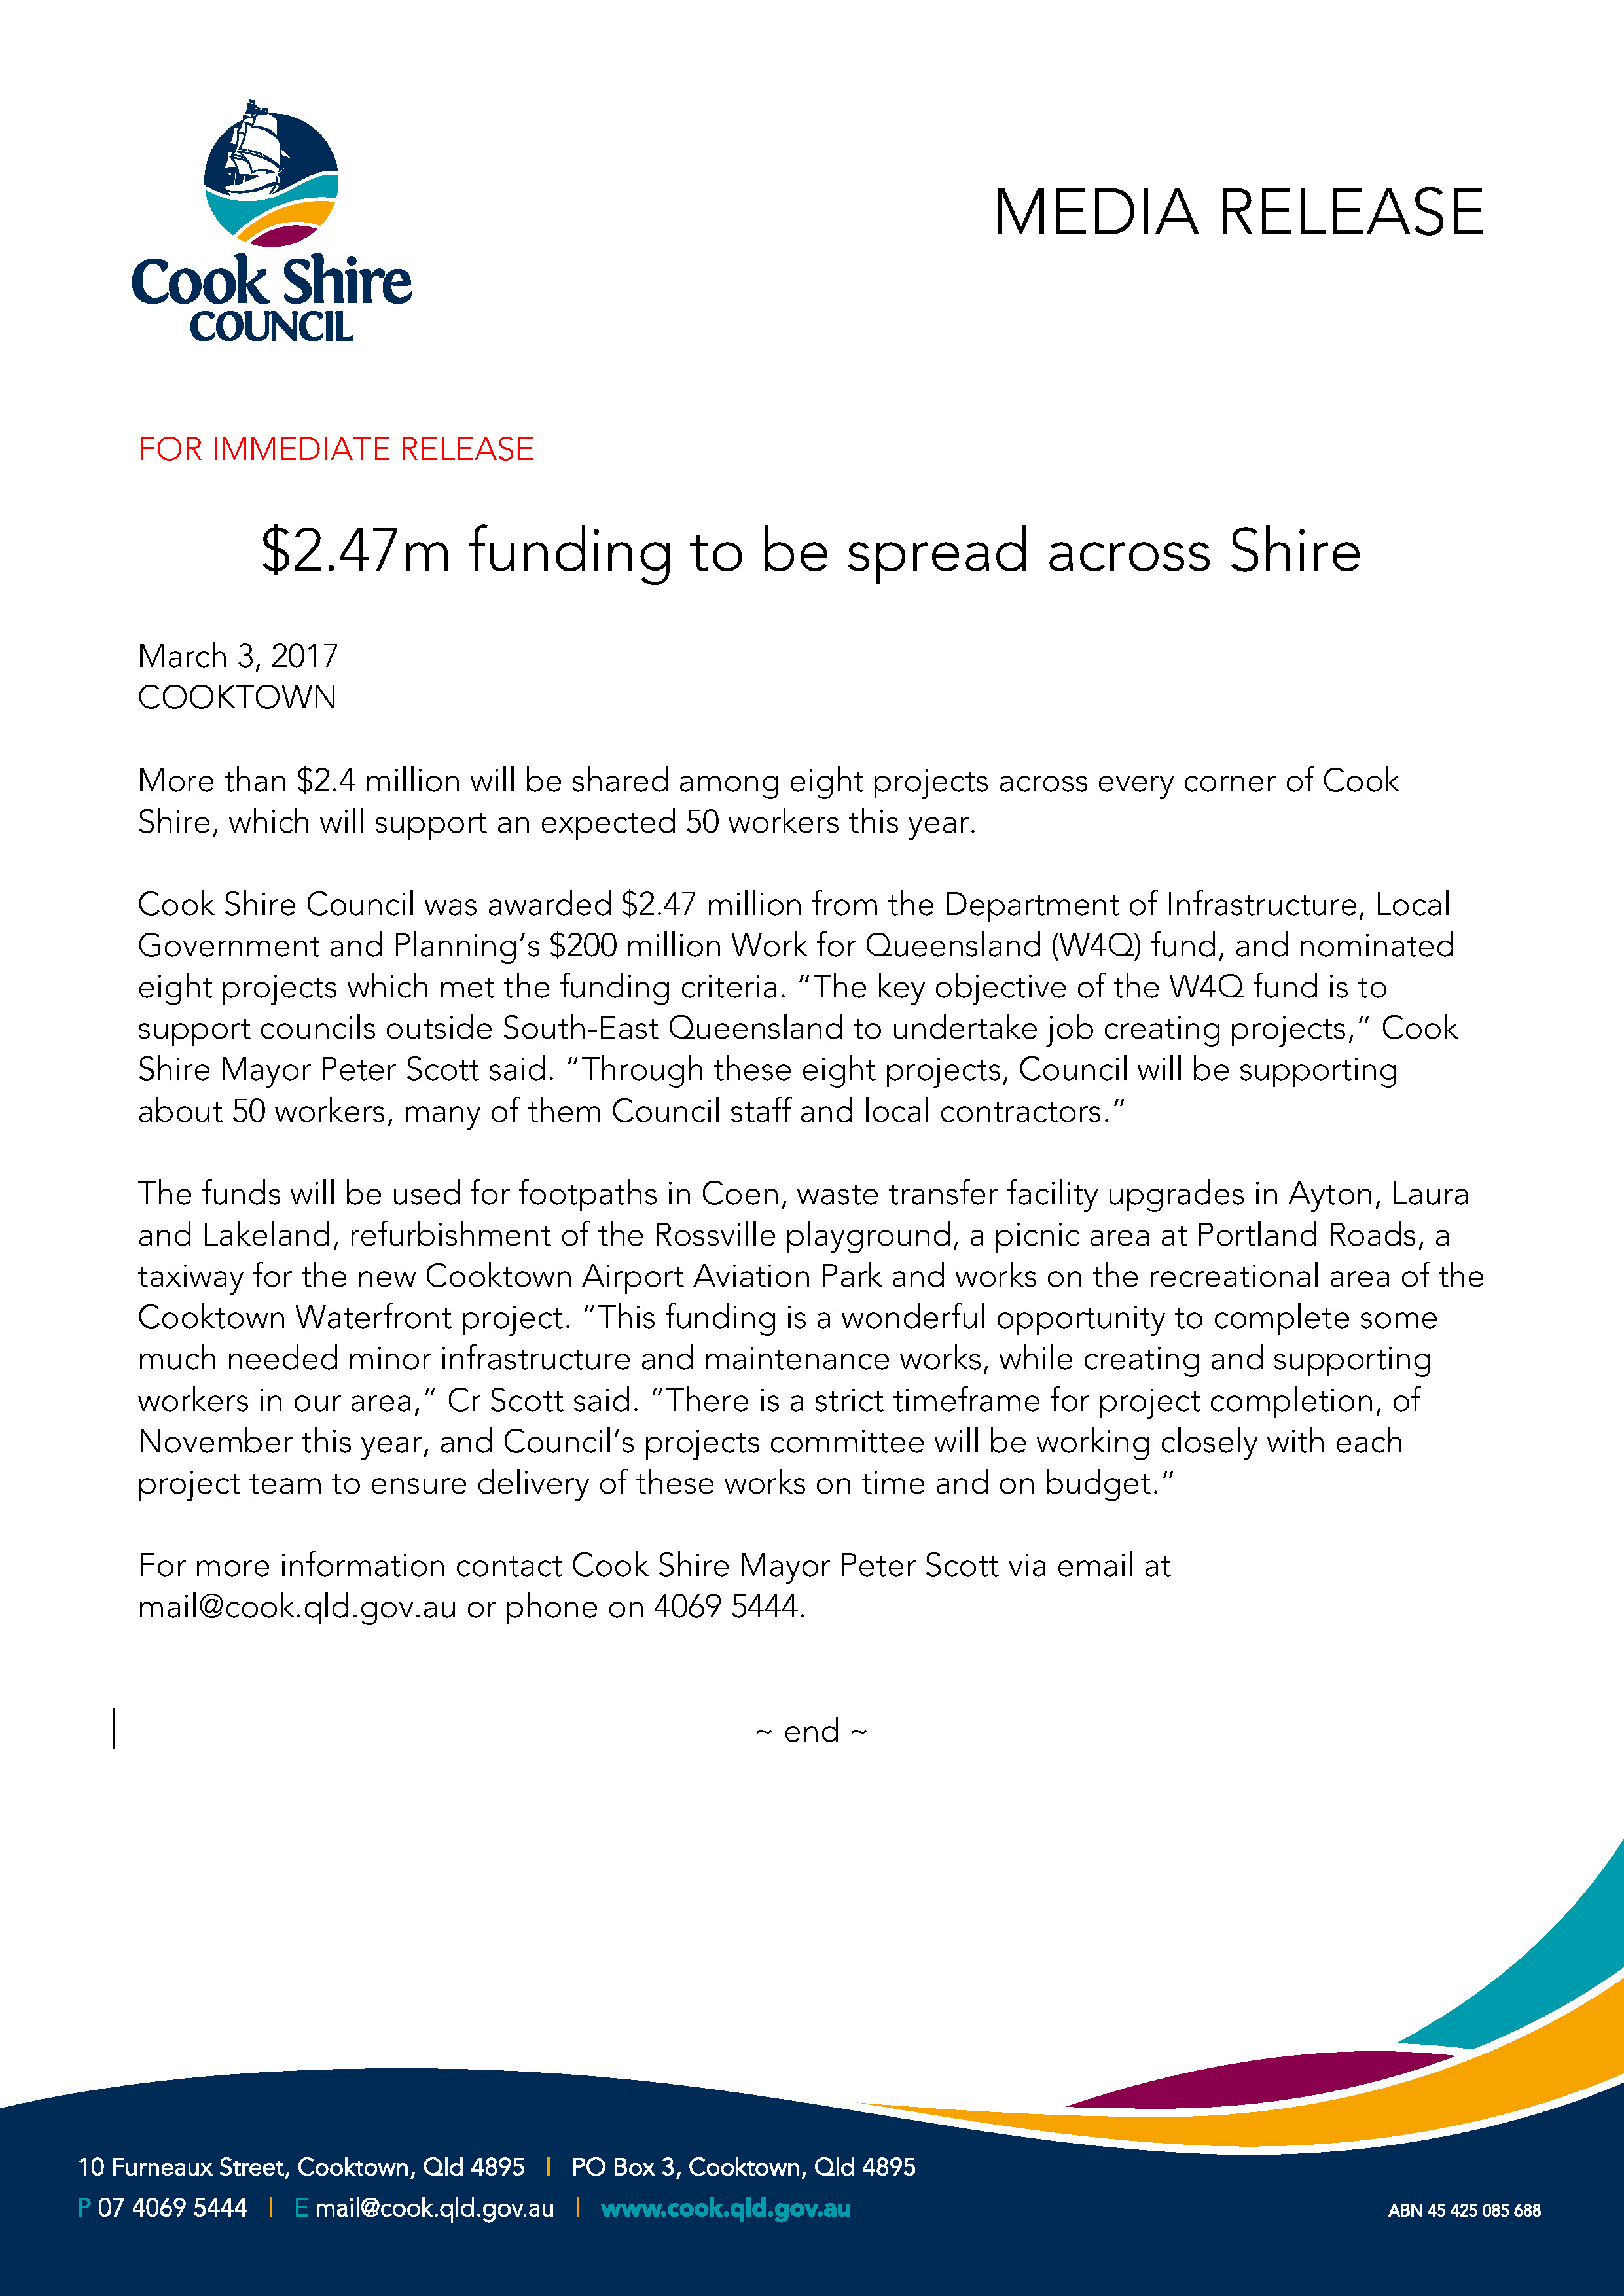 $2.47m in funding to be spread across the Shire